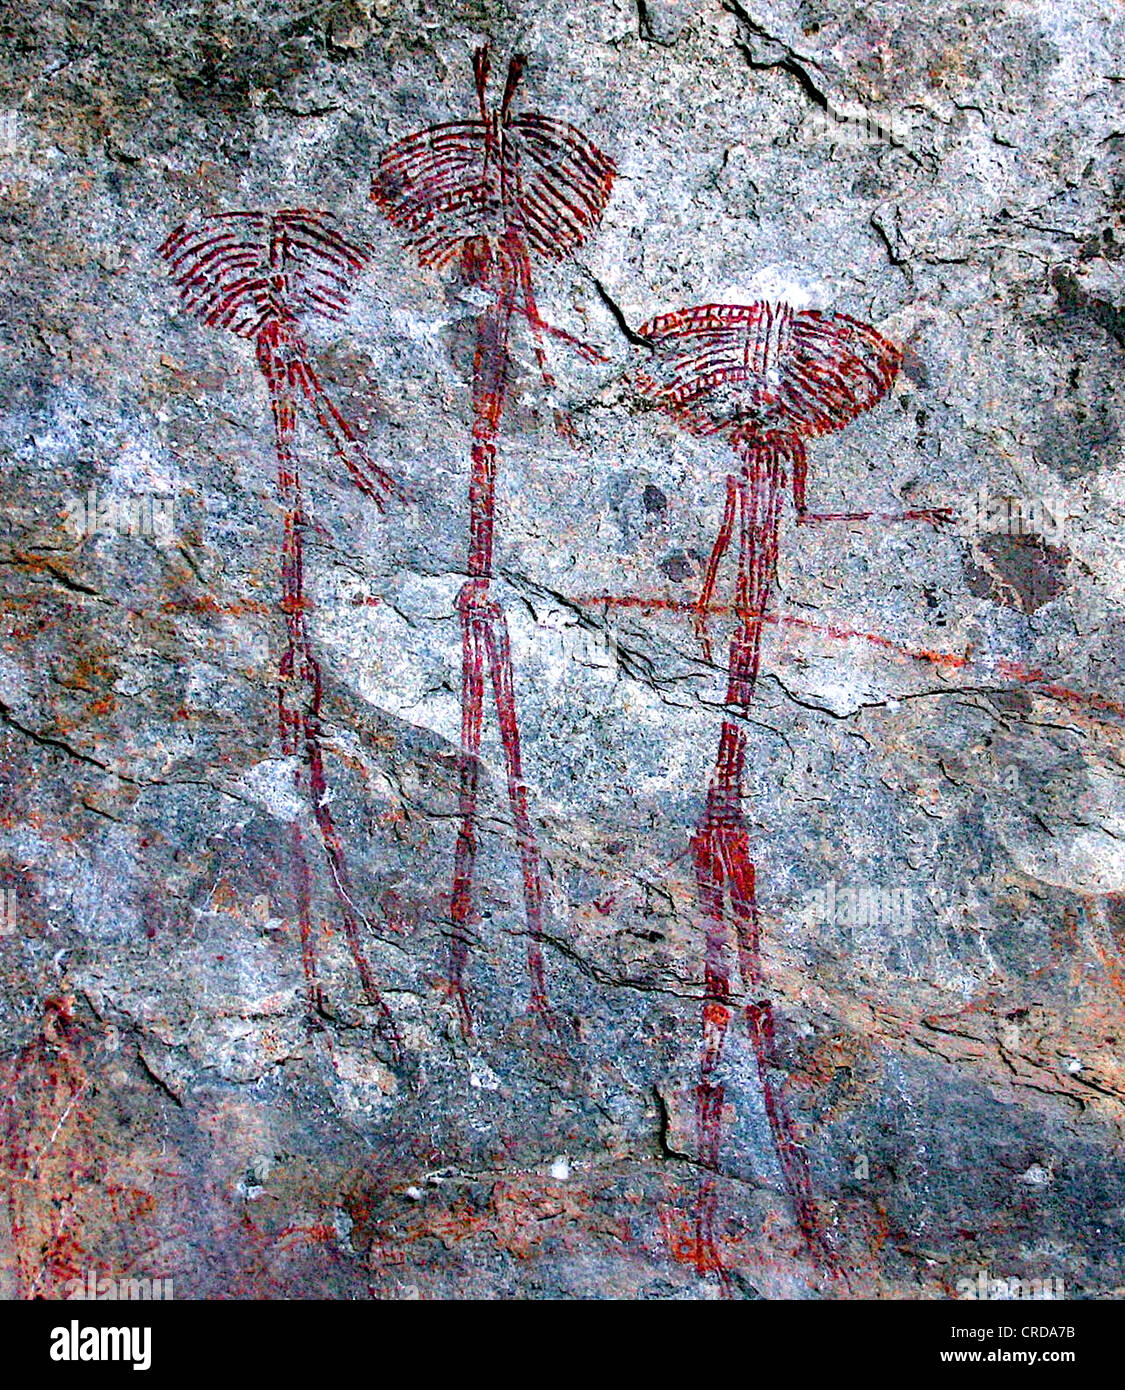 A CAVE PAINTING AT KOLO, NORTHERN TANZANIA. A SERIES OF CAVE PAINTINGS IN KOLO, NORTHERN TANZANIA, COULD BE THE OLDEST 'ART Stock Photo